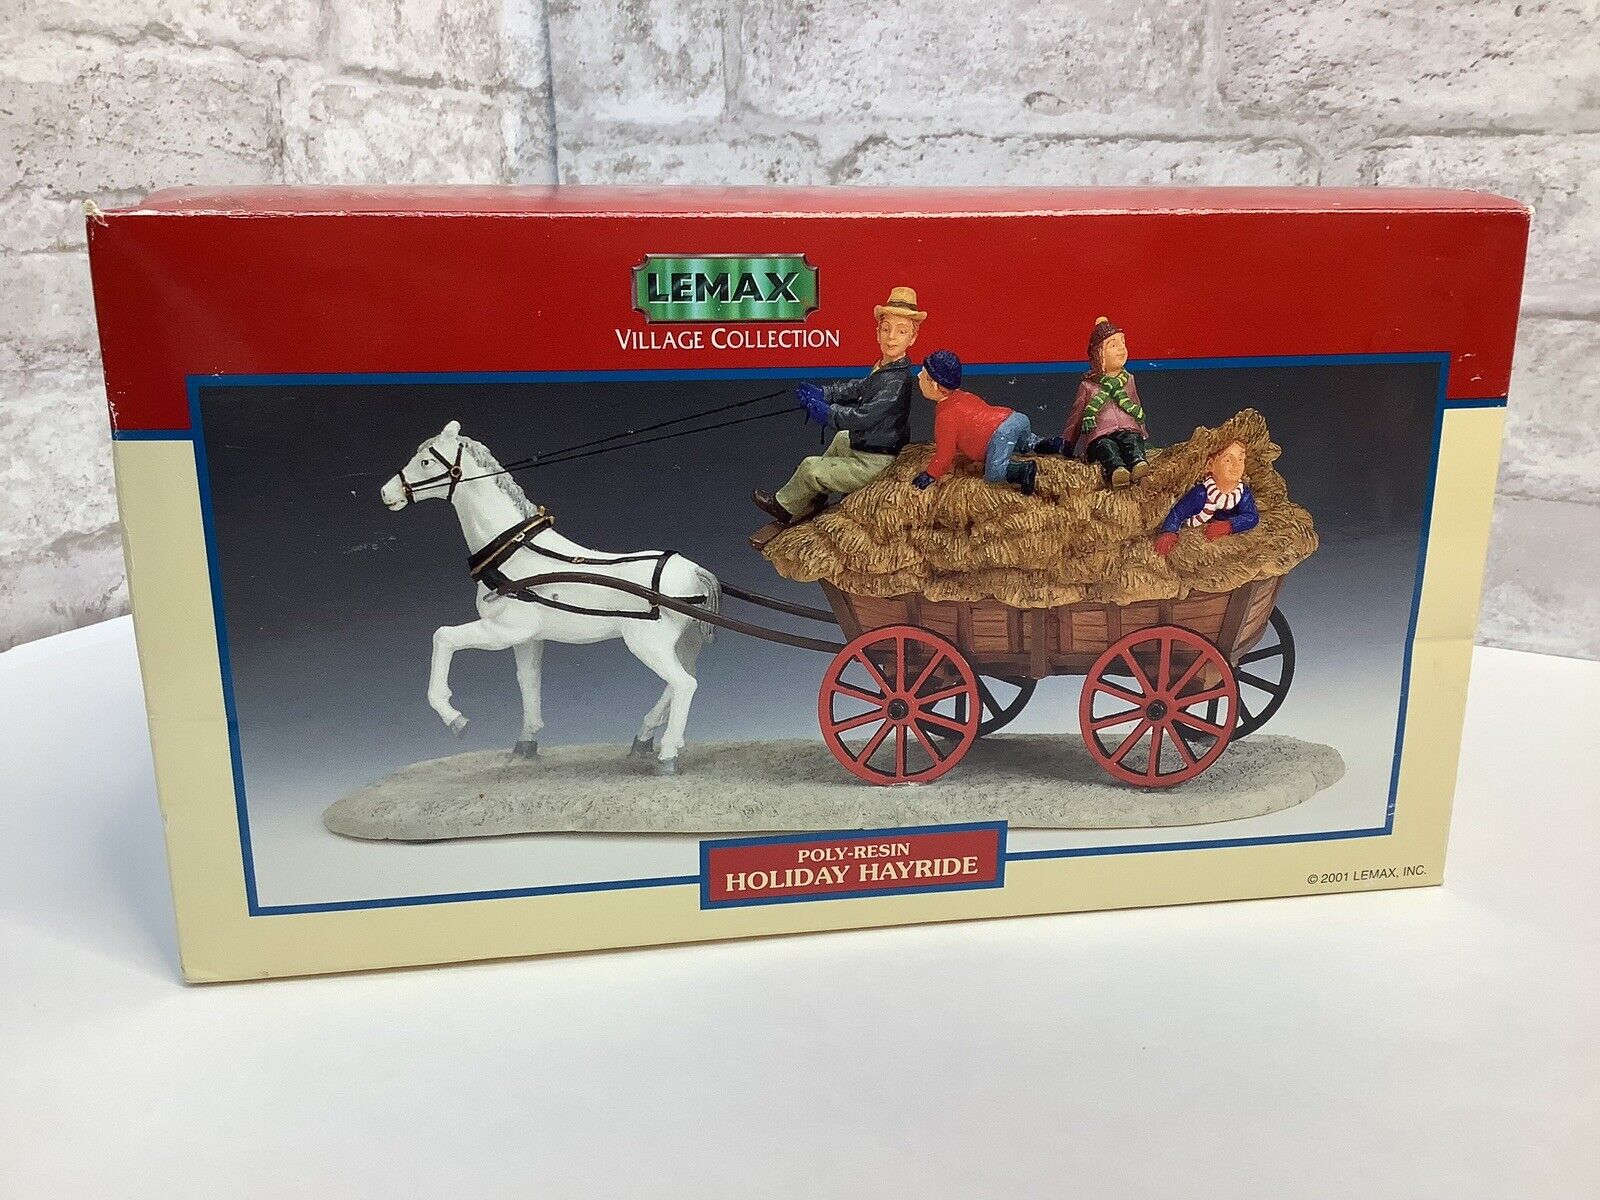 Lemax Christmas Village Collection Poly-Resin Holiday Hayride T410 New In Box